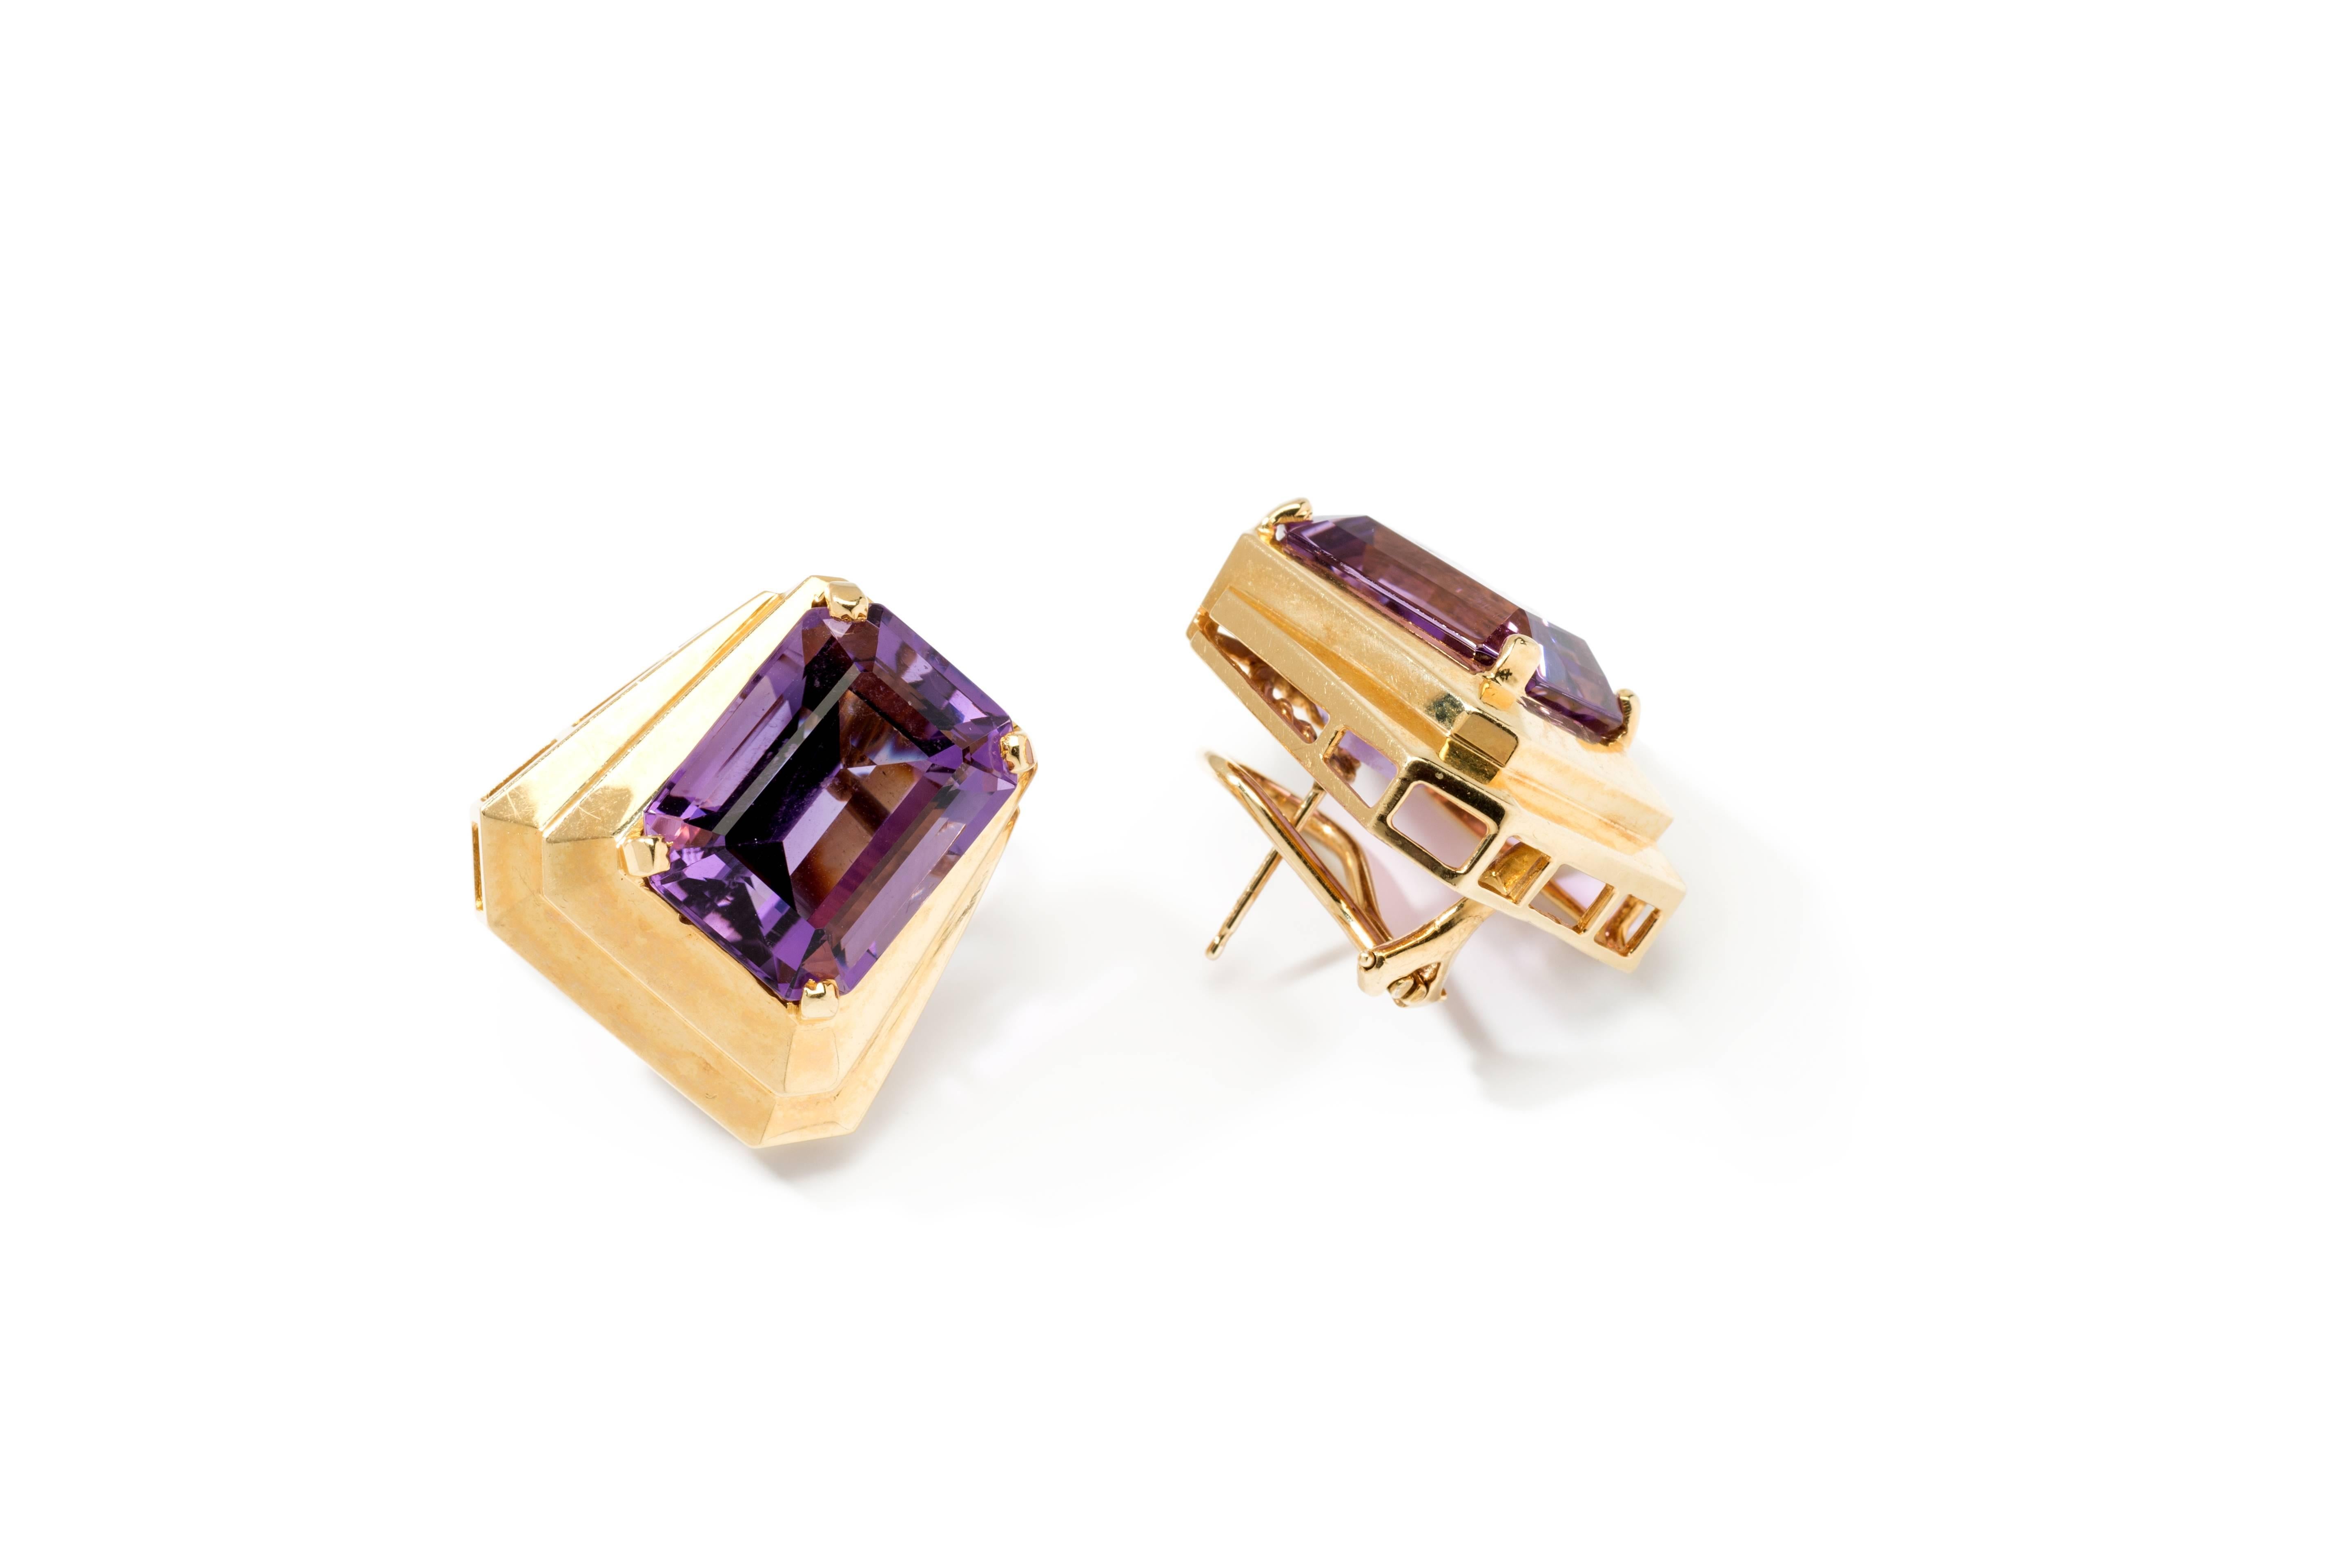 Europa, 1940s-1950s. Set with 2 amethysts in emerald-cut, mounted in 18 K yellow gold. Total weight: 17,88 grams.
Measurements: 0.83 x 0.87 in ( 2,1 x 2,2 cm )
